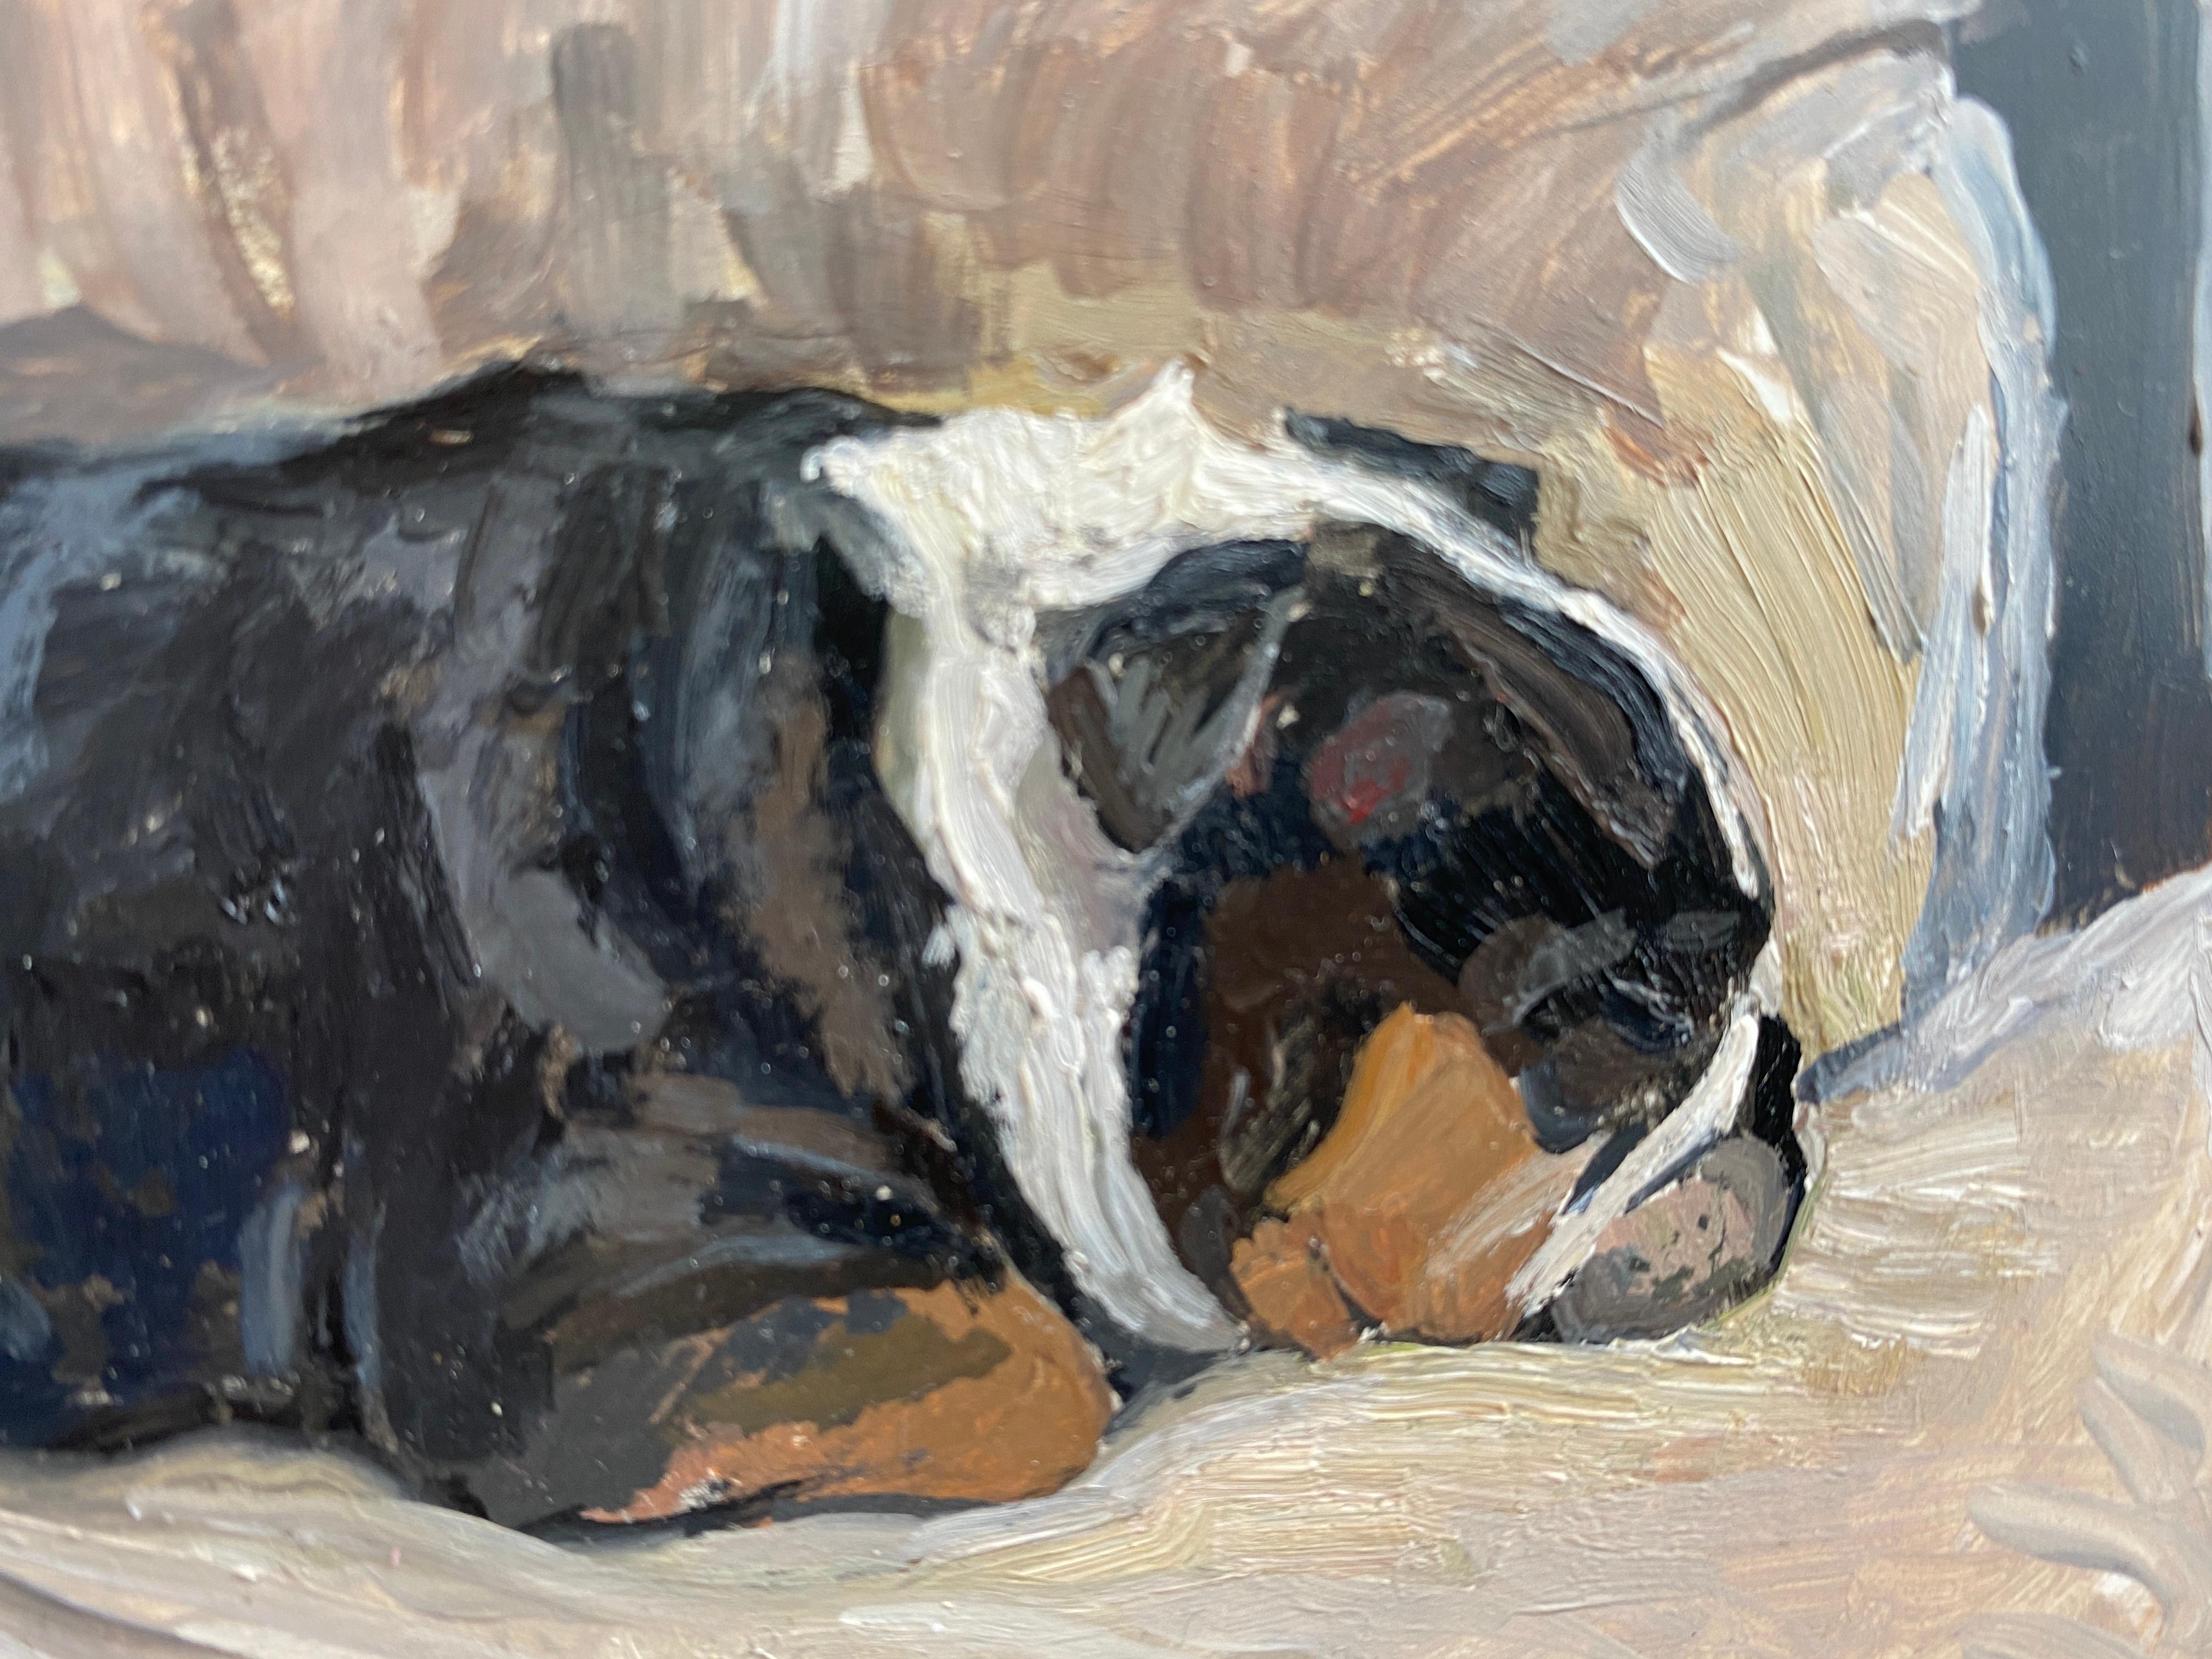 A miniature painting of a bulldog laying on a couch.

Painting dimensions: 4.25 x 6.5 inches
Framed dimensions: 5 x 7.25 inches

Framed in a simple black minimalist frame. (As pictured).

Artist Bio
Rachel Personett was born in Hawaii, but raised in